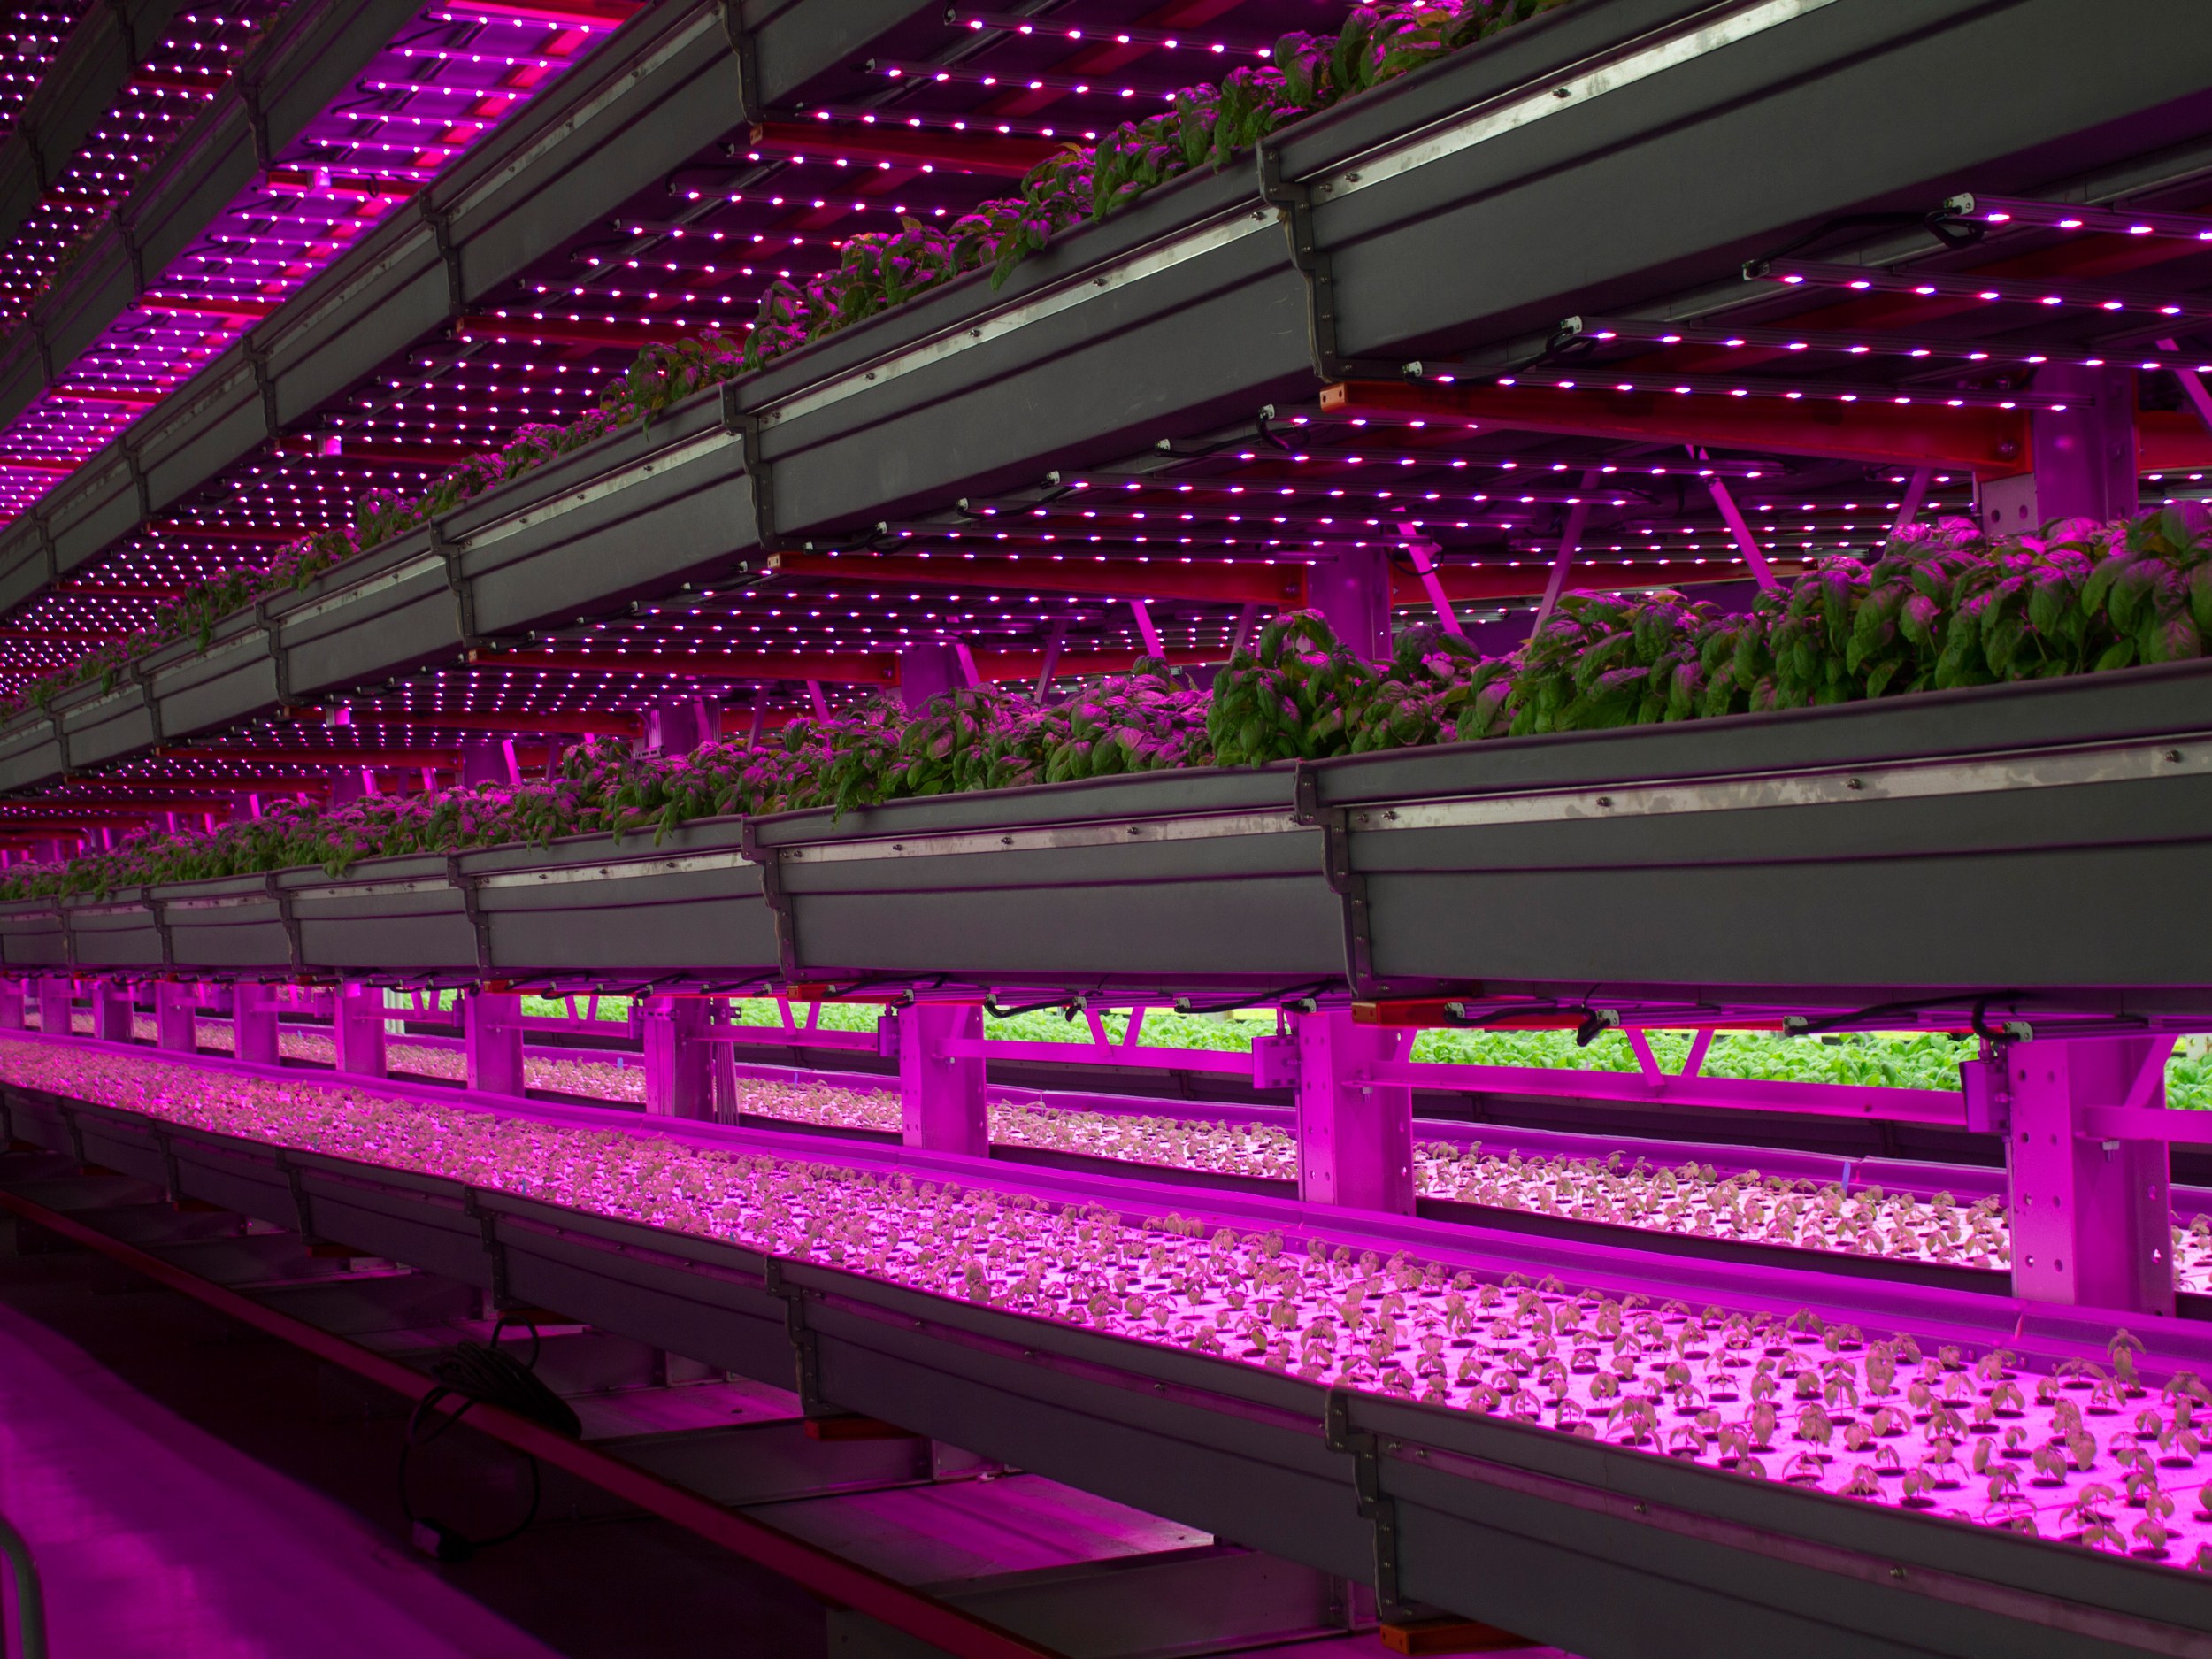 Illumitex grow lights in a vertical farm. The company is developing high-resolution imaging technology that will integrate with sensors and their lights to give a fuller picture of the growing environment.